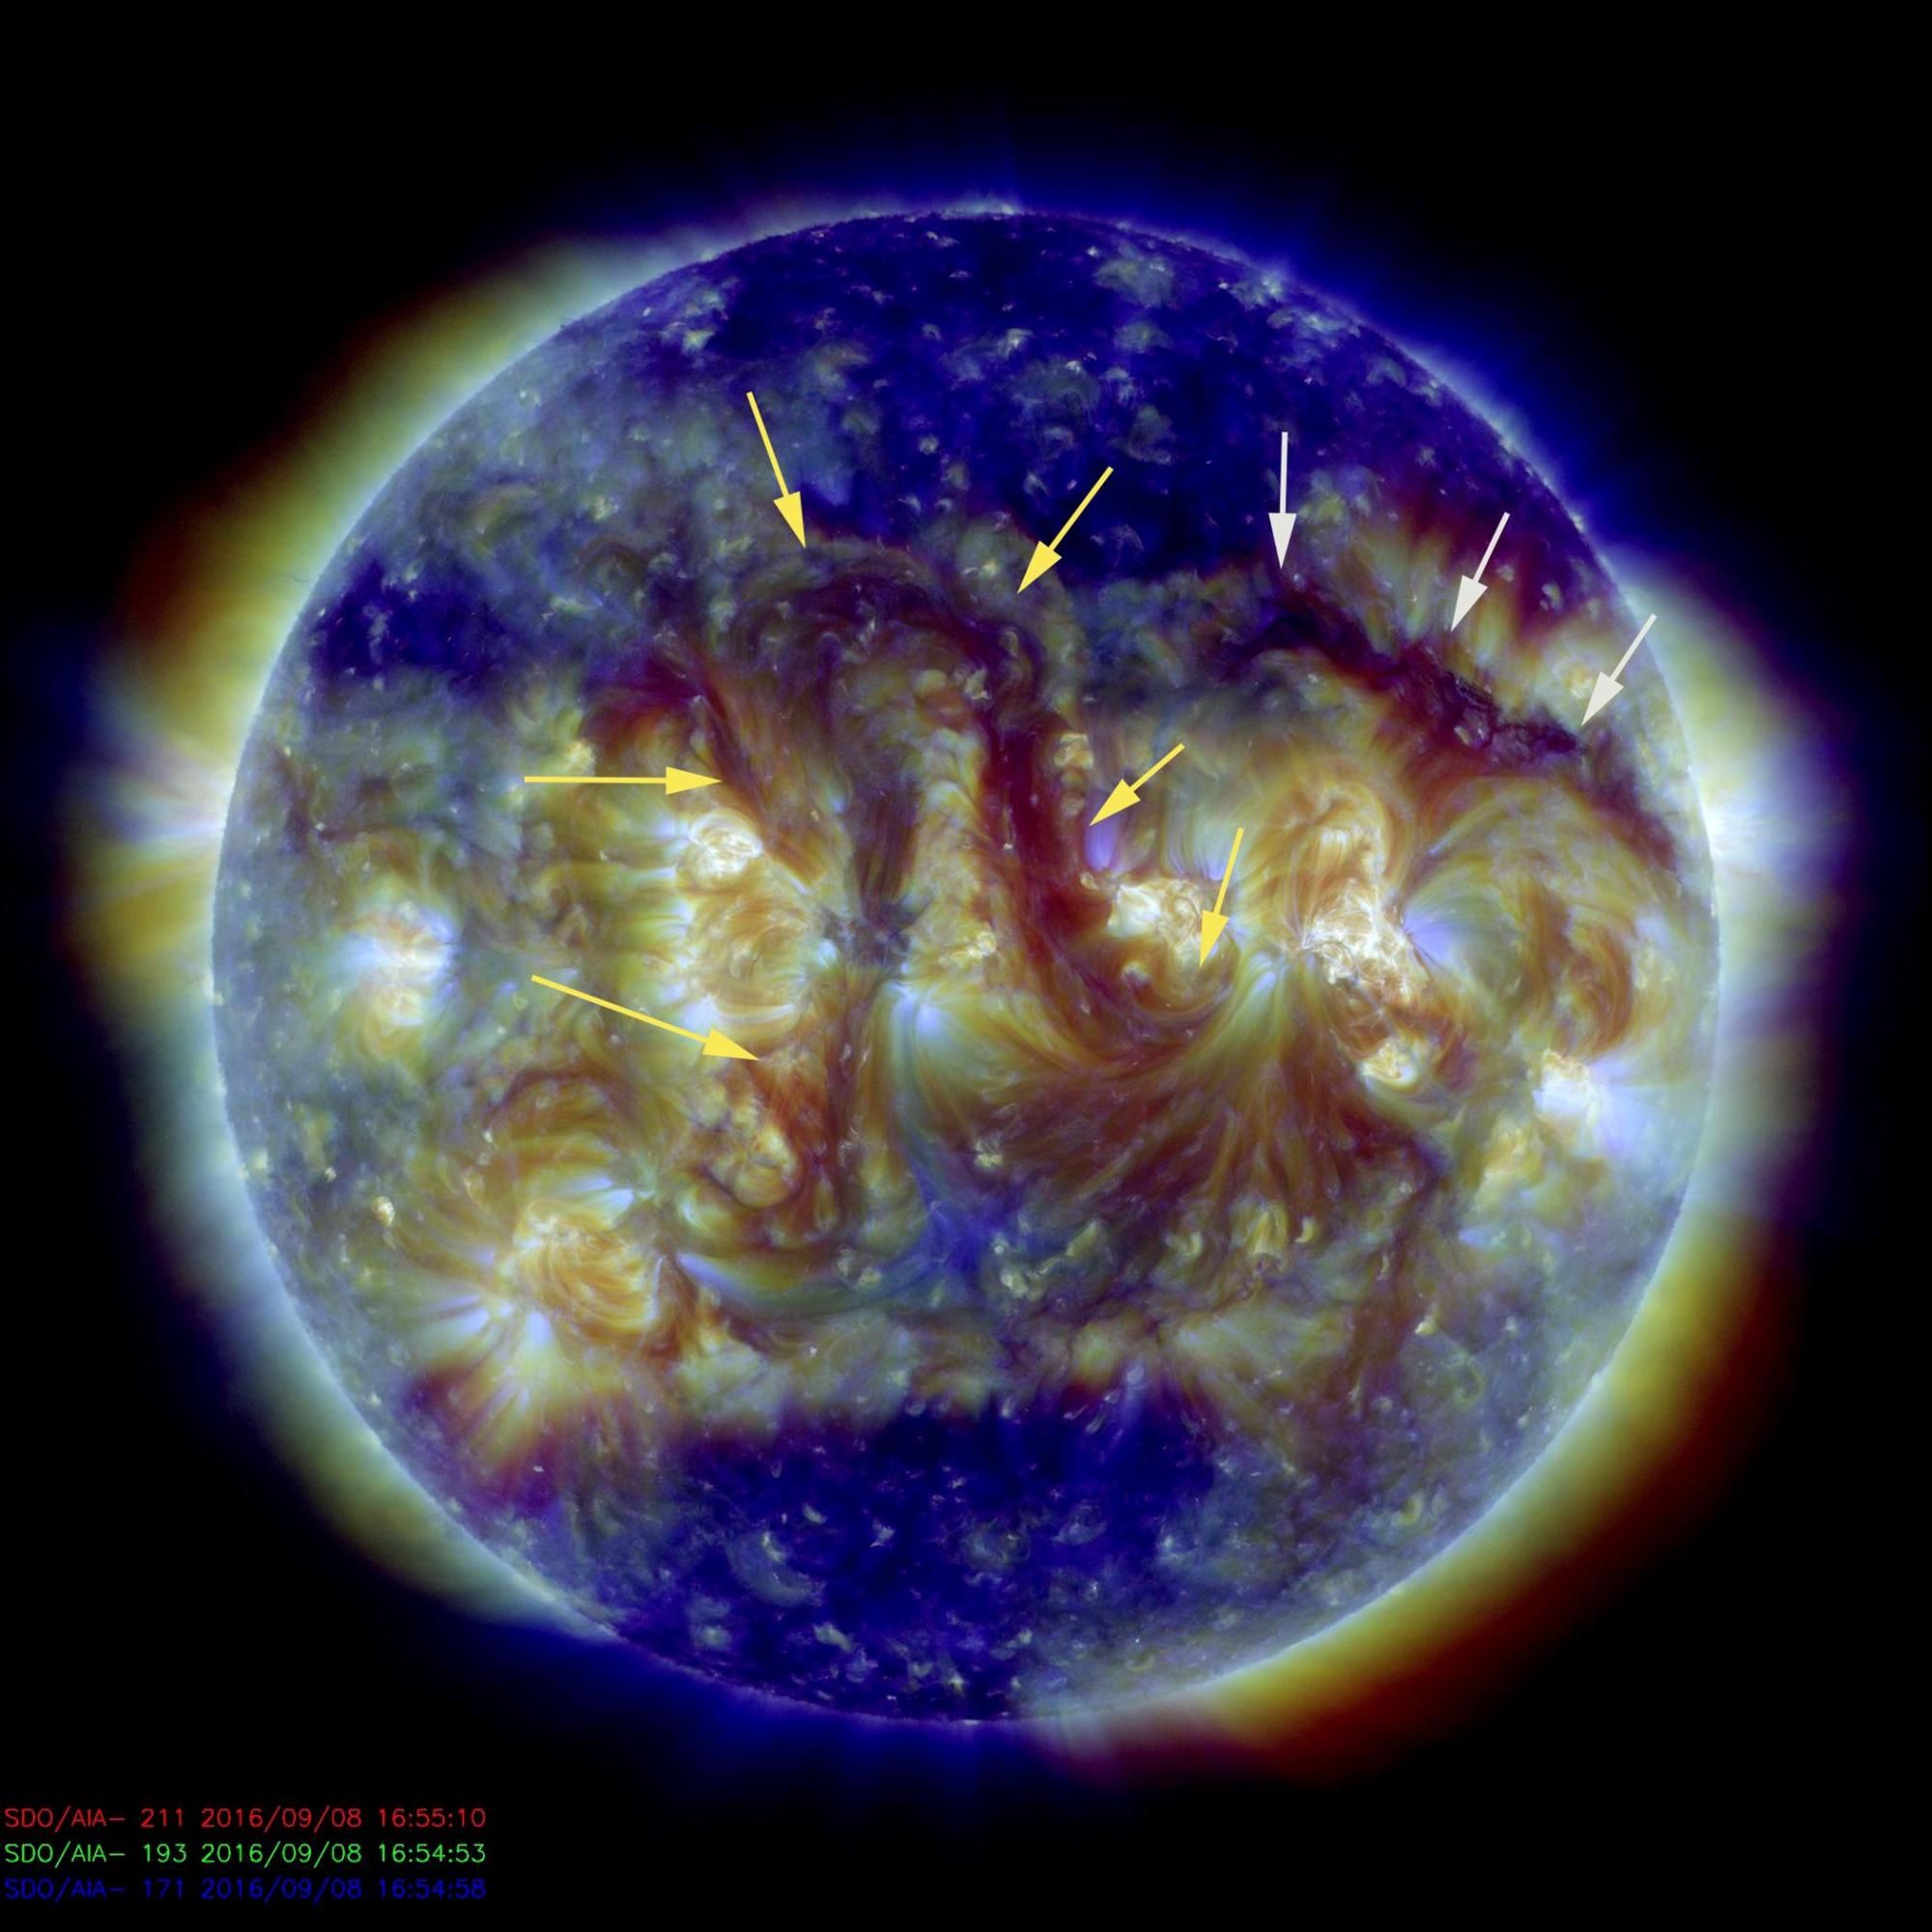 A pair of elongated filaments observed across the Sun. The image was made by combining three images in different wavelengths of extreme ultraviolet light shown in blues, yellow and dark red.